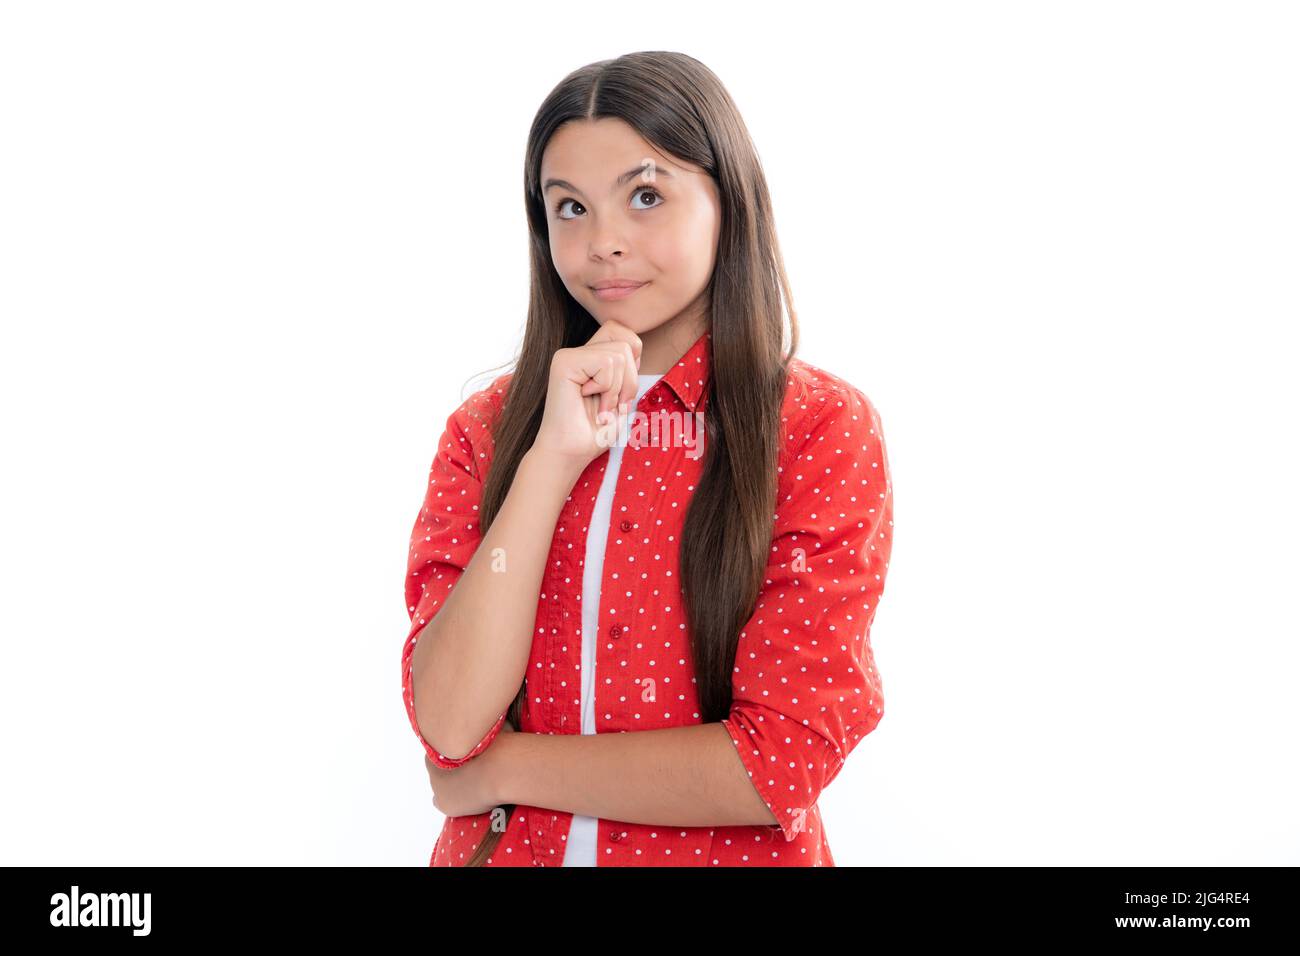 Teenager girl 12, 13, 14 years old thinking against white background. Child think and creative idea concept. Stock Photo